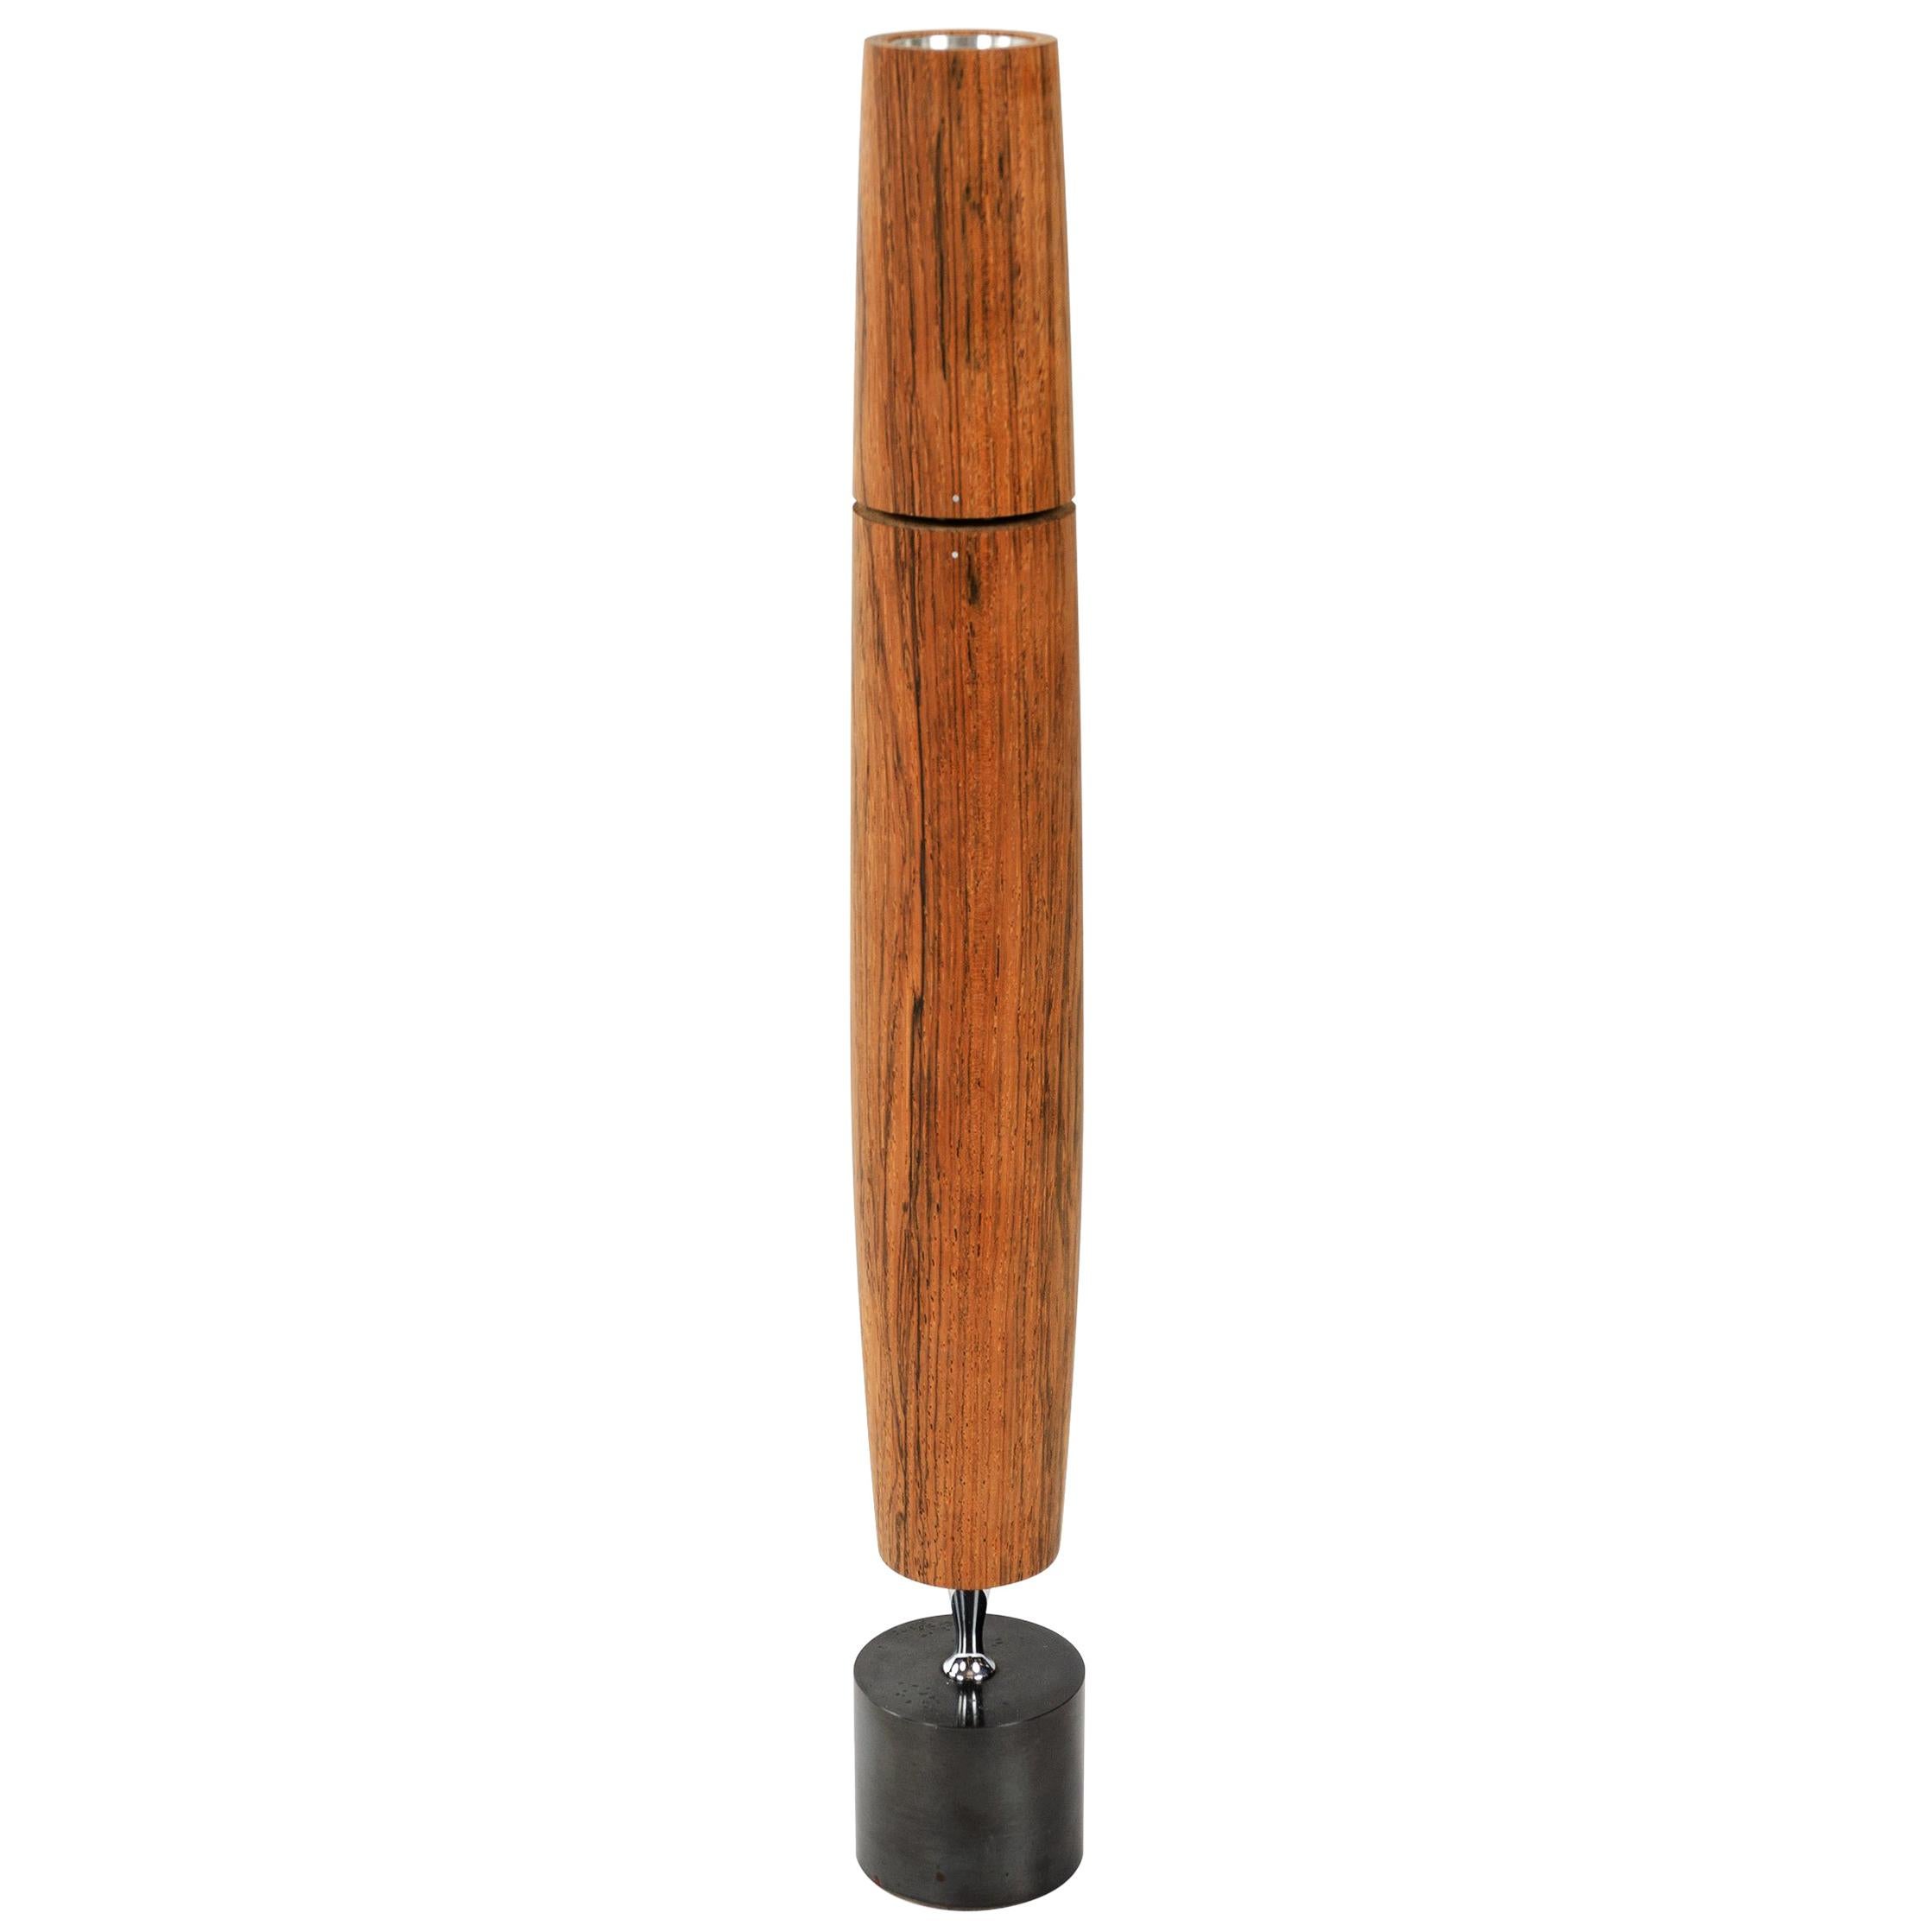 'Varaflame' Butane Candlestick by Ronson For Sale